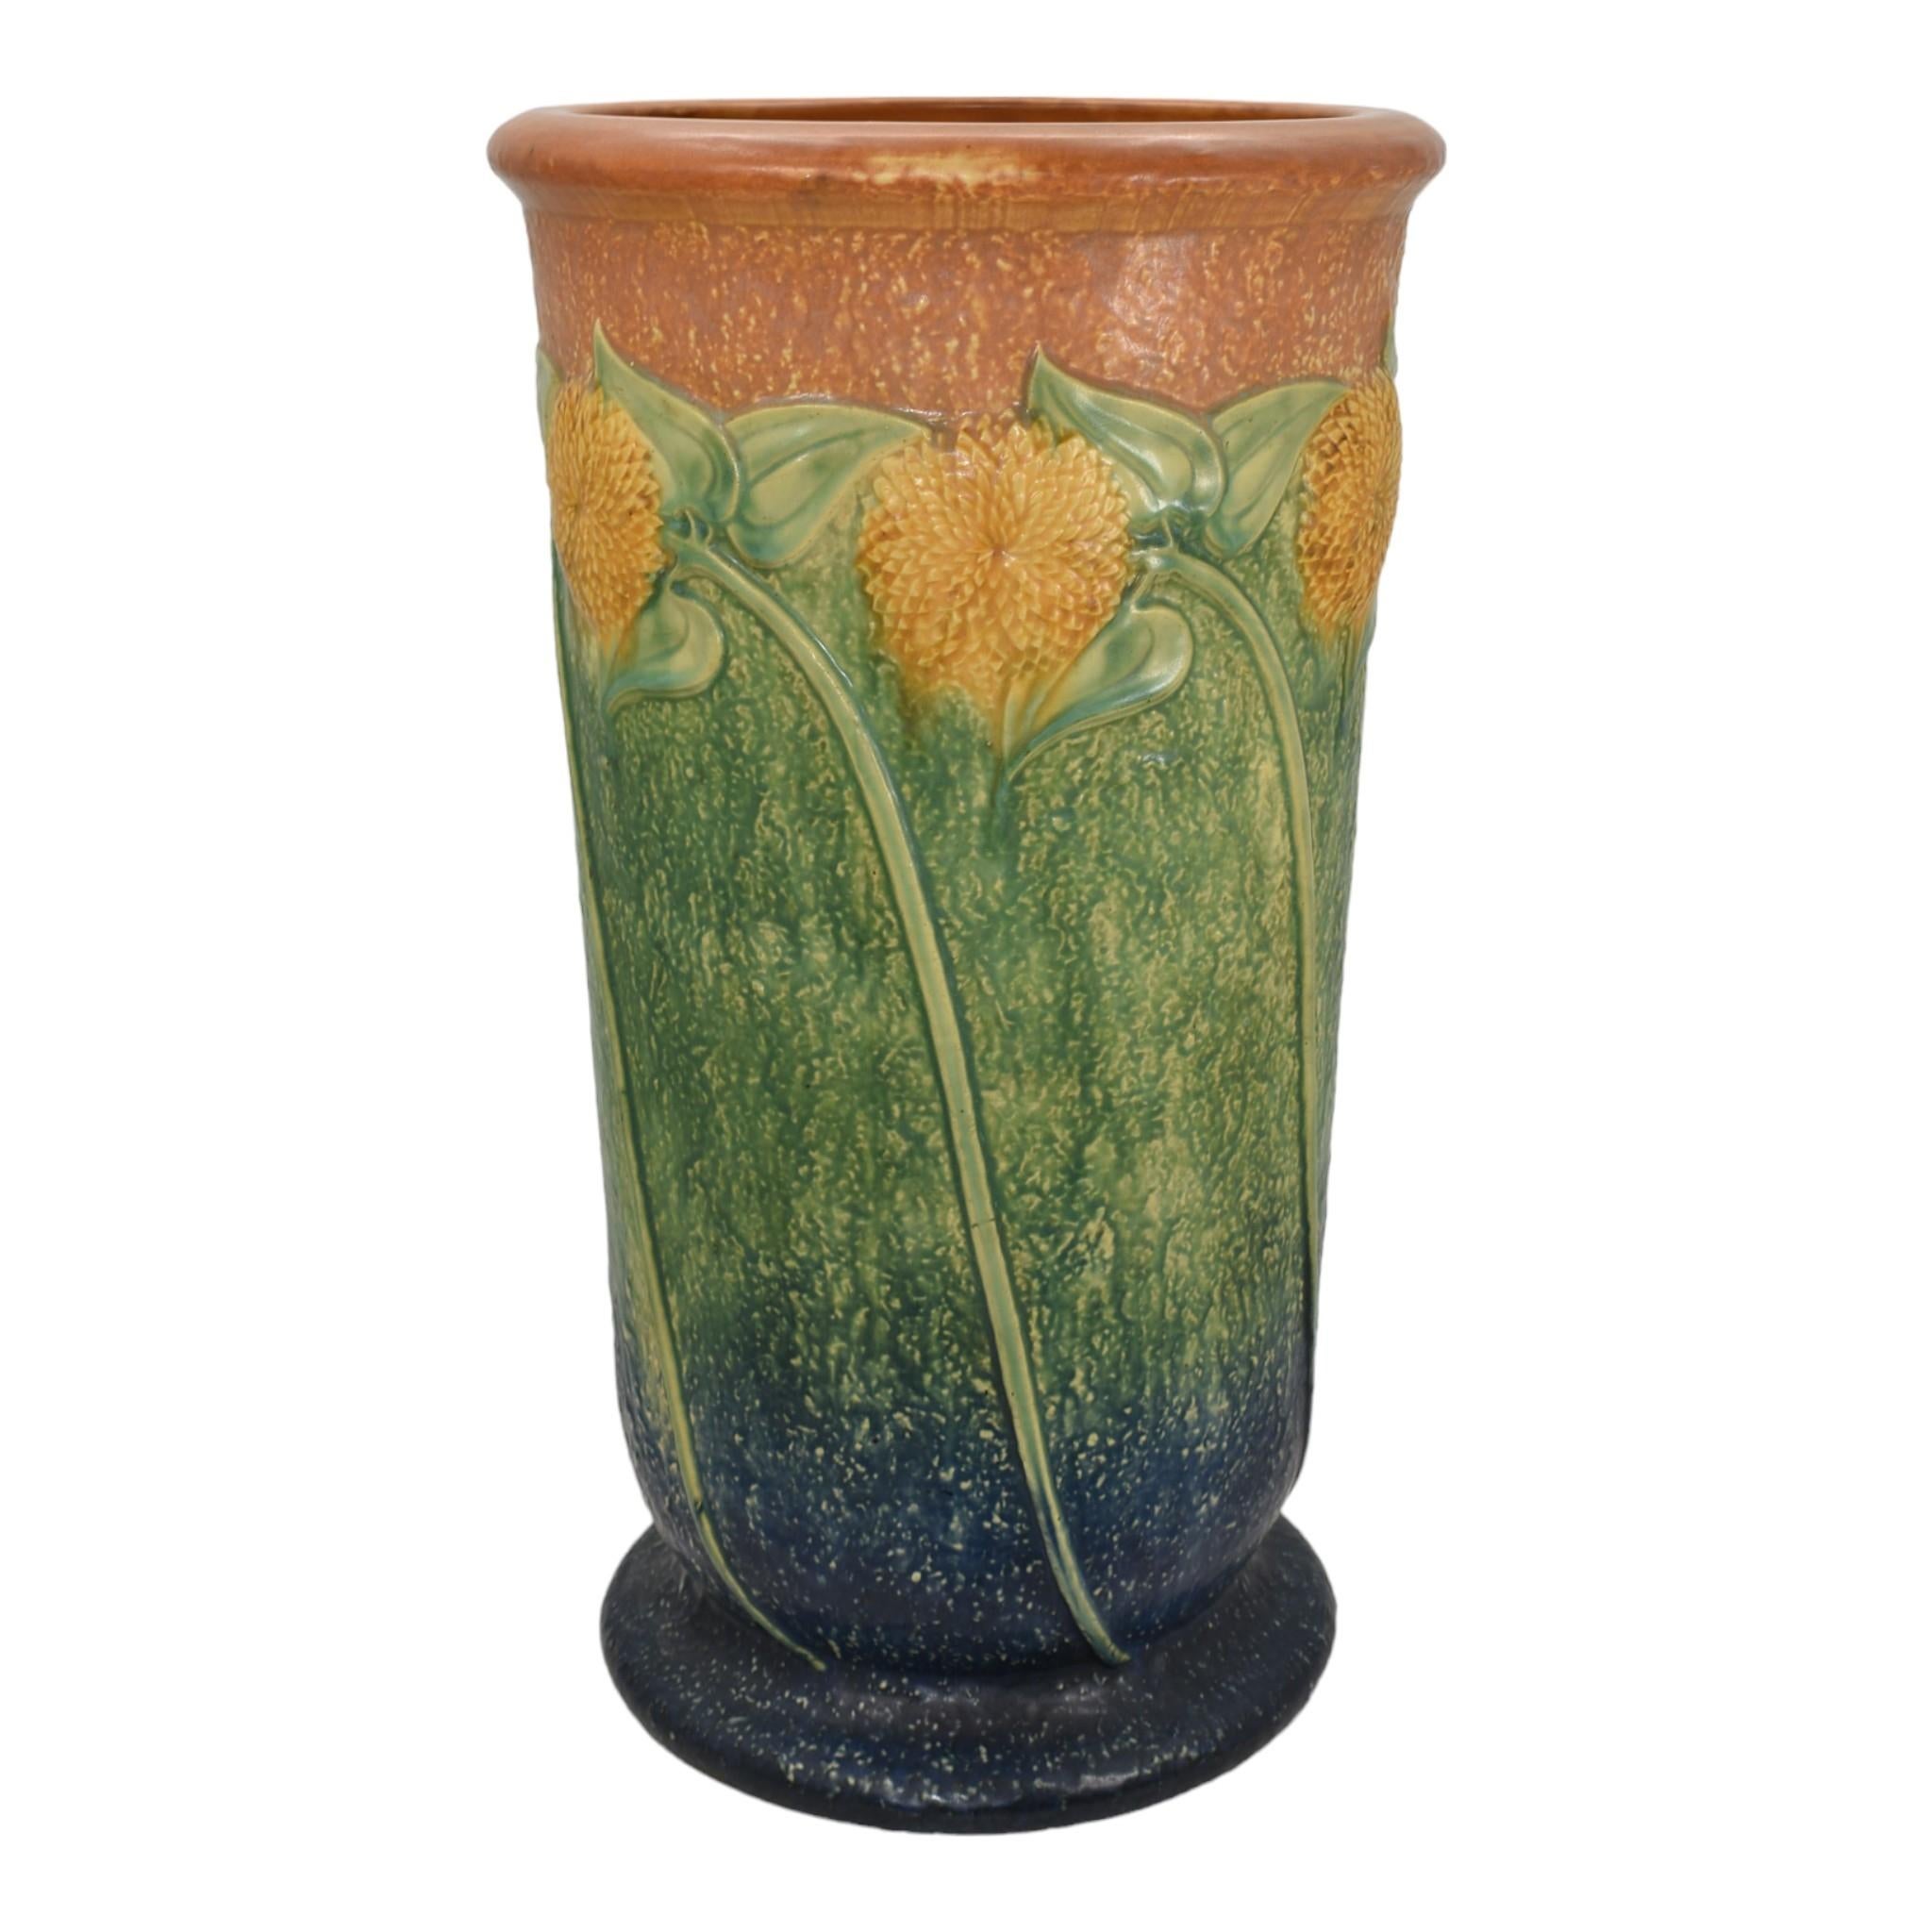 Roseville Sunflower 1930 Vintage Arts And Crafts Ceramic Umbrella Stand 770-20 In Good Condition In East Peoria, IL